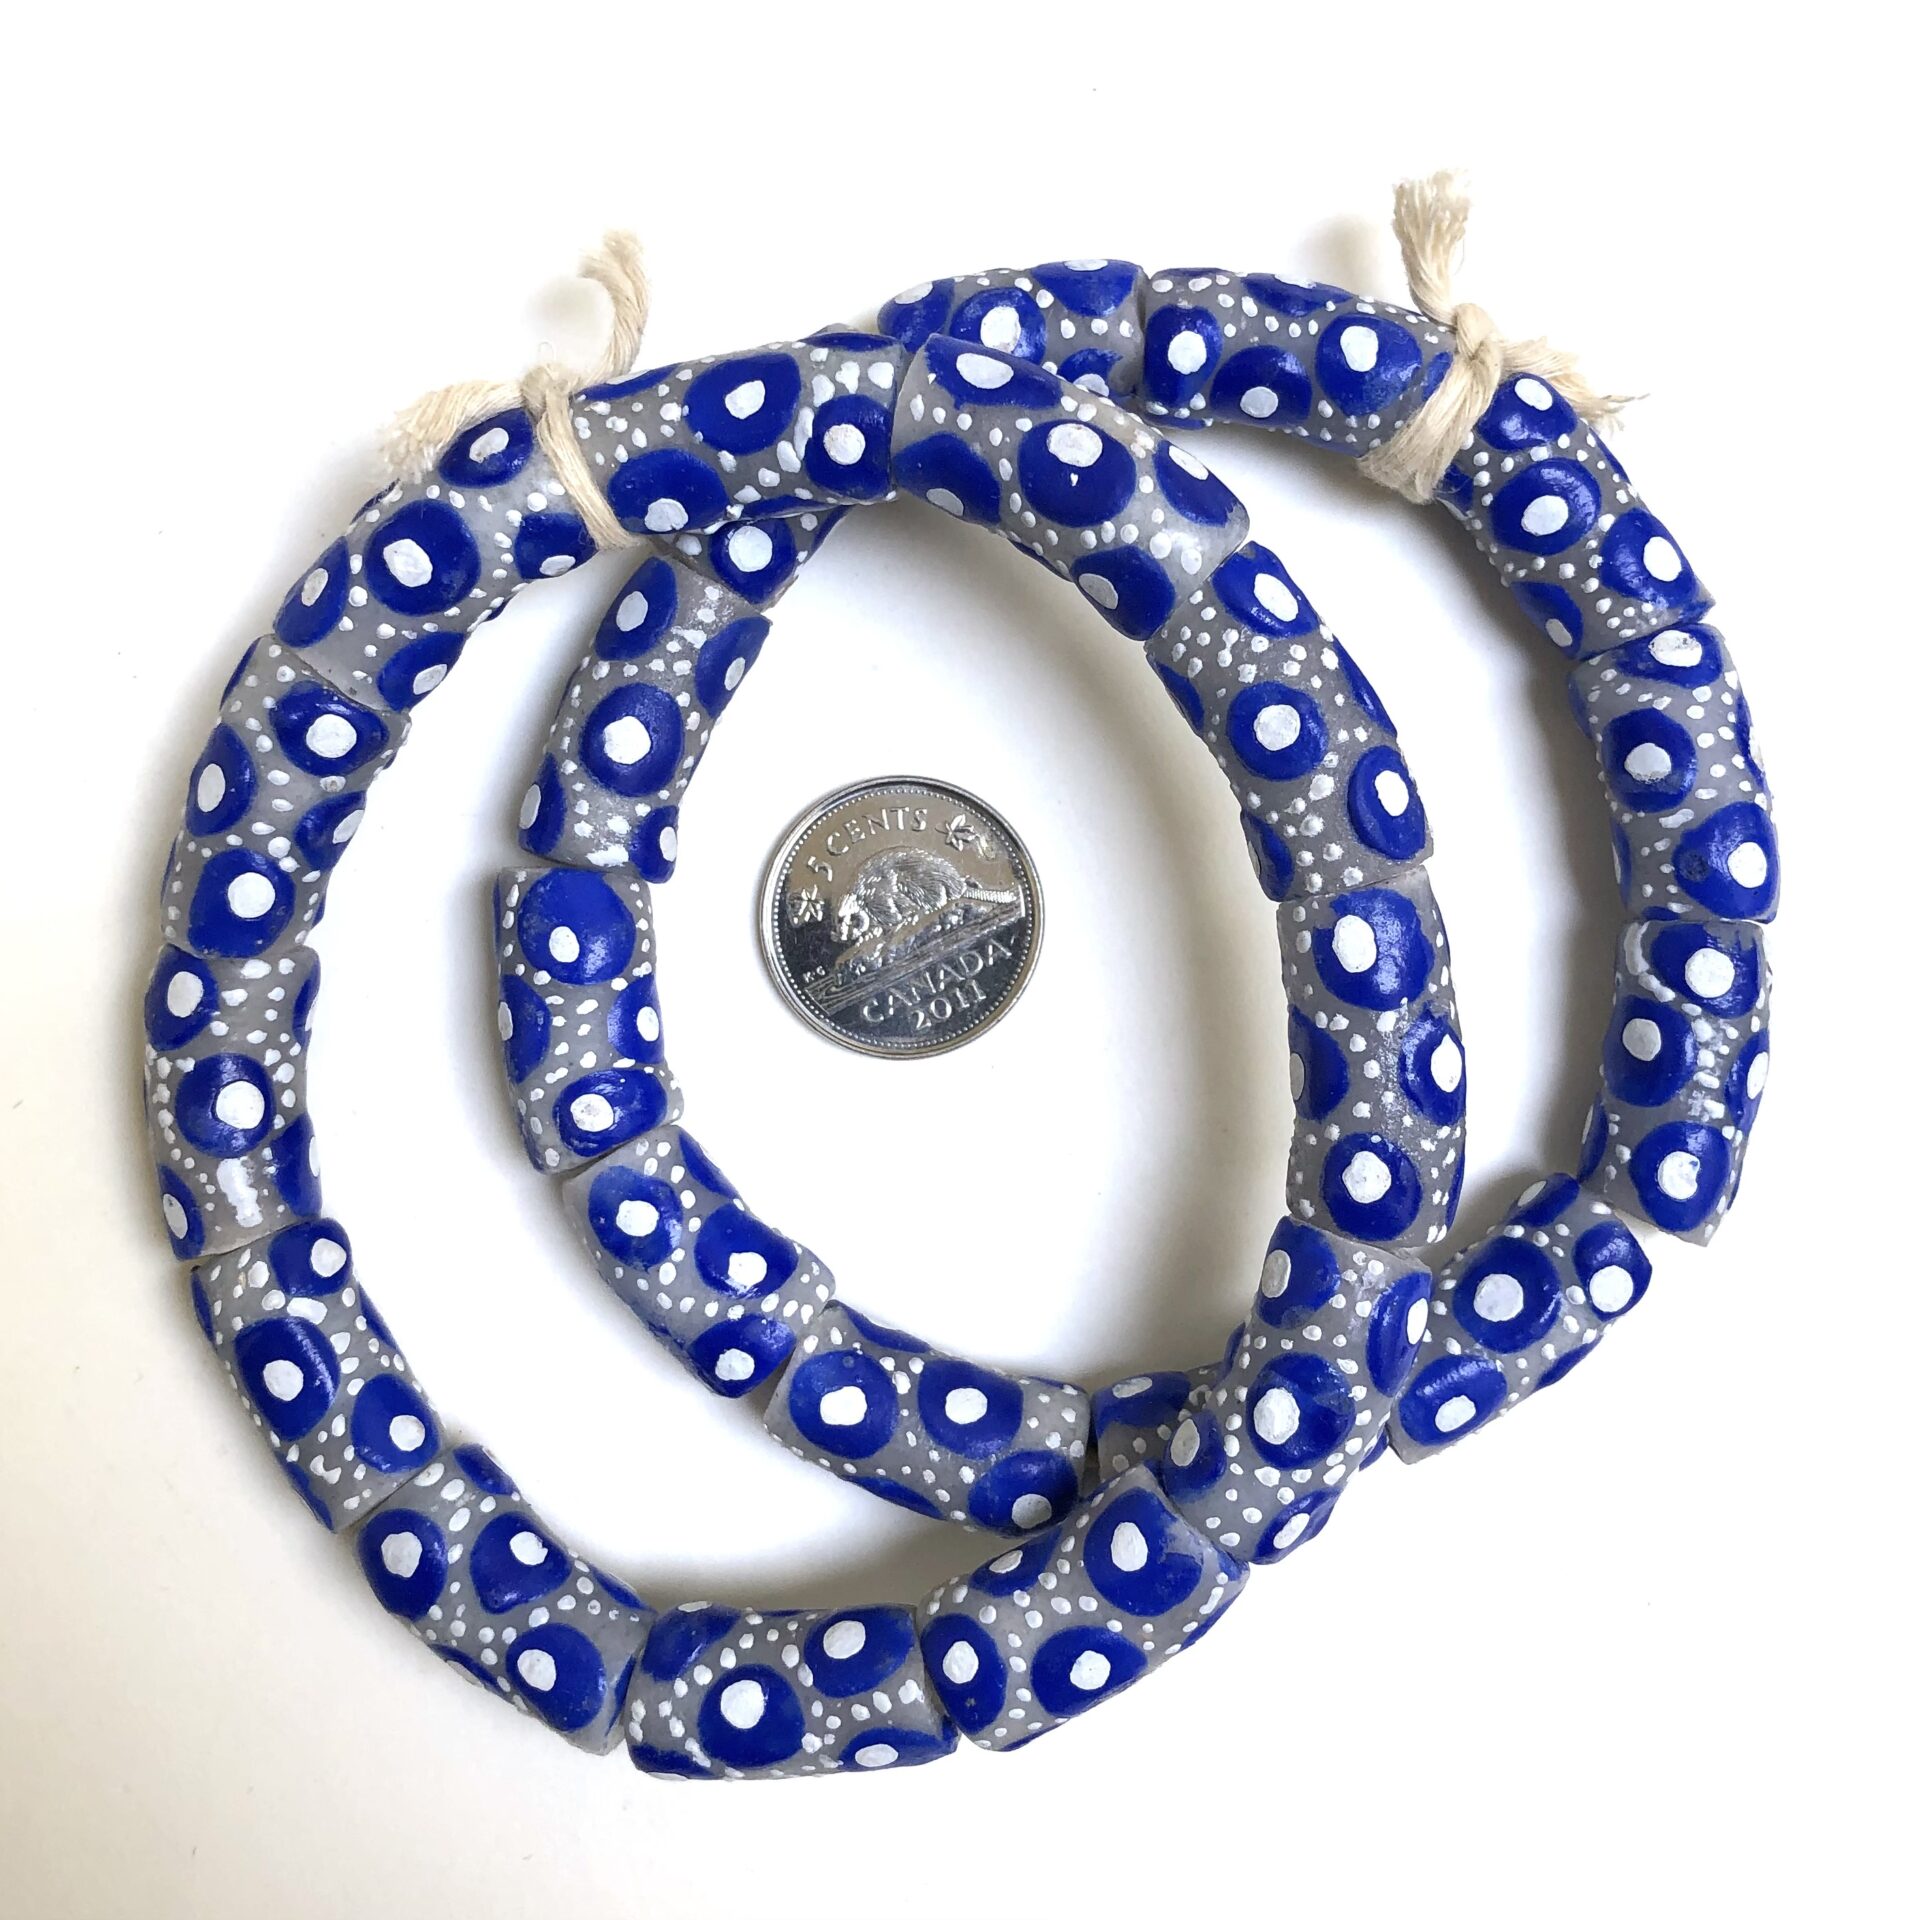 Handpainted Recycled Glass Beads